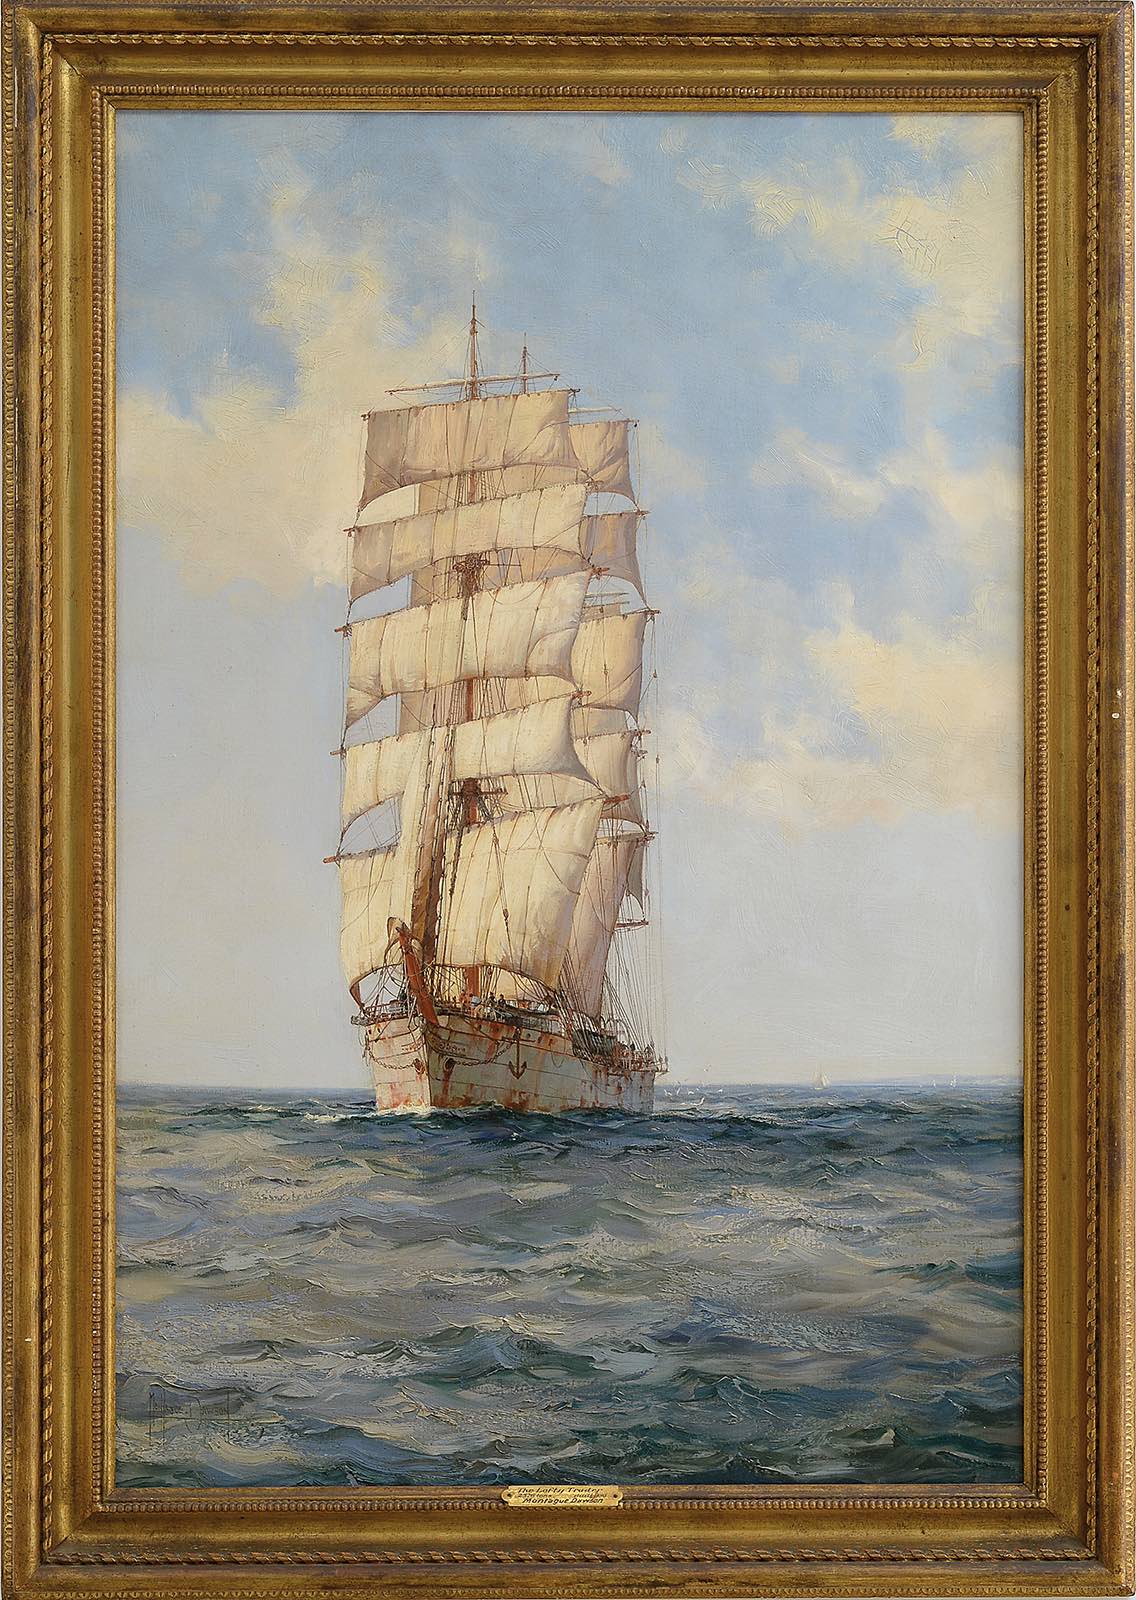 MONTAGUE DAWSON'S THE LOFTY TRADER, estimated at $40,000-60,000.